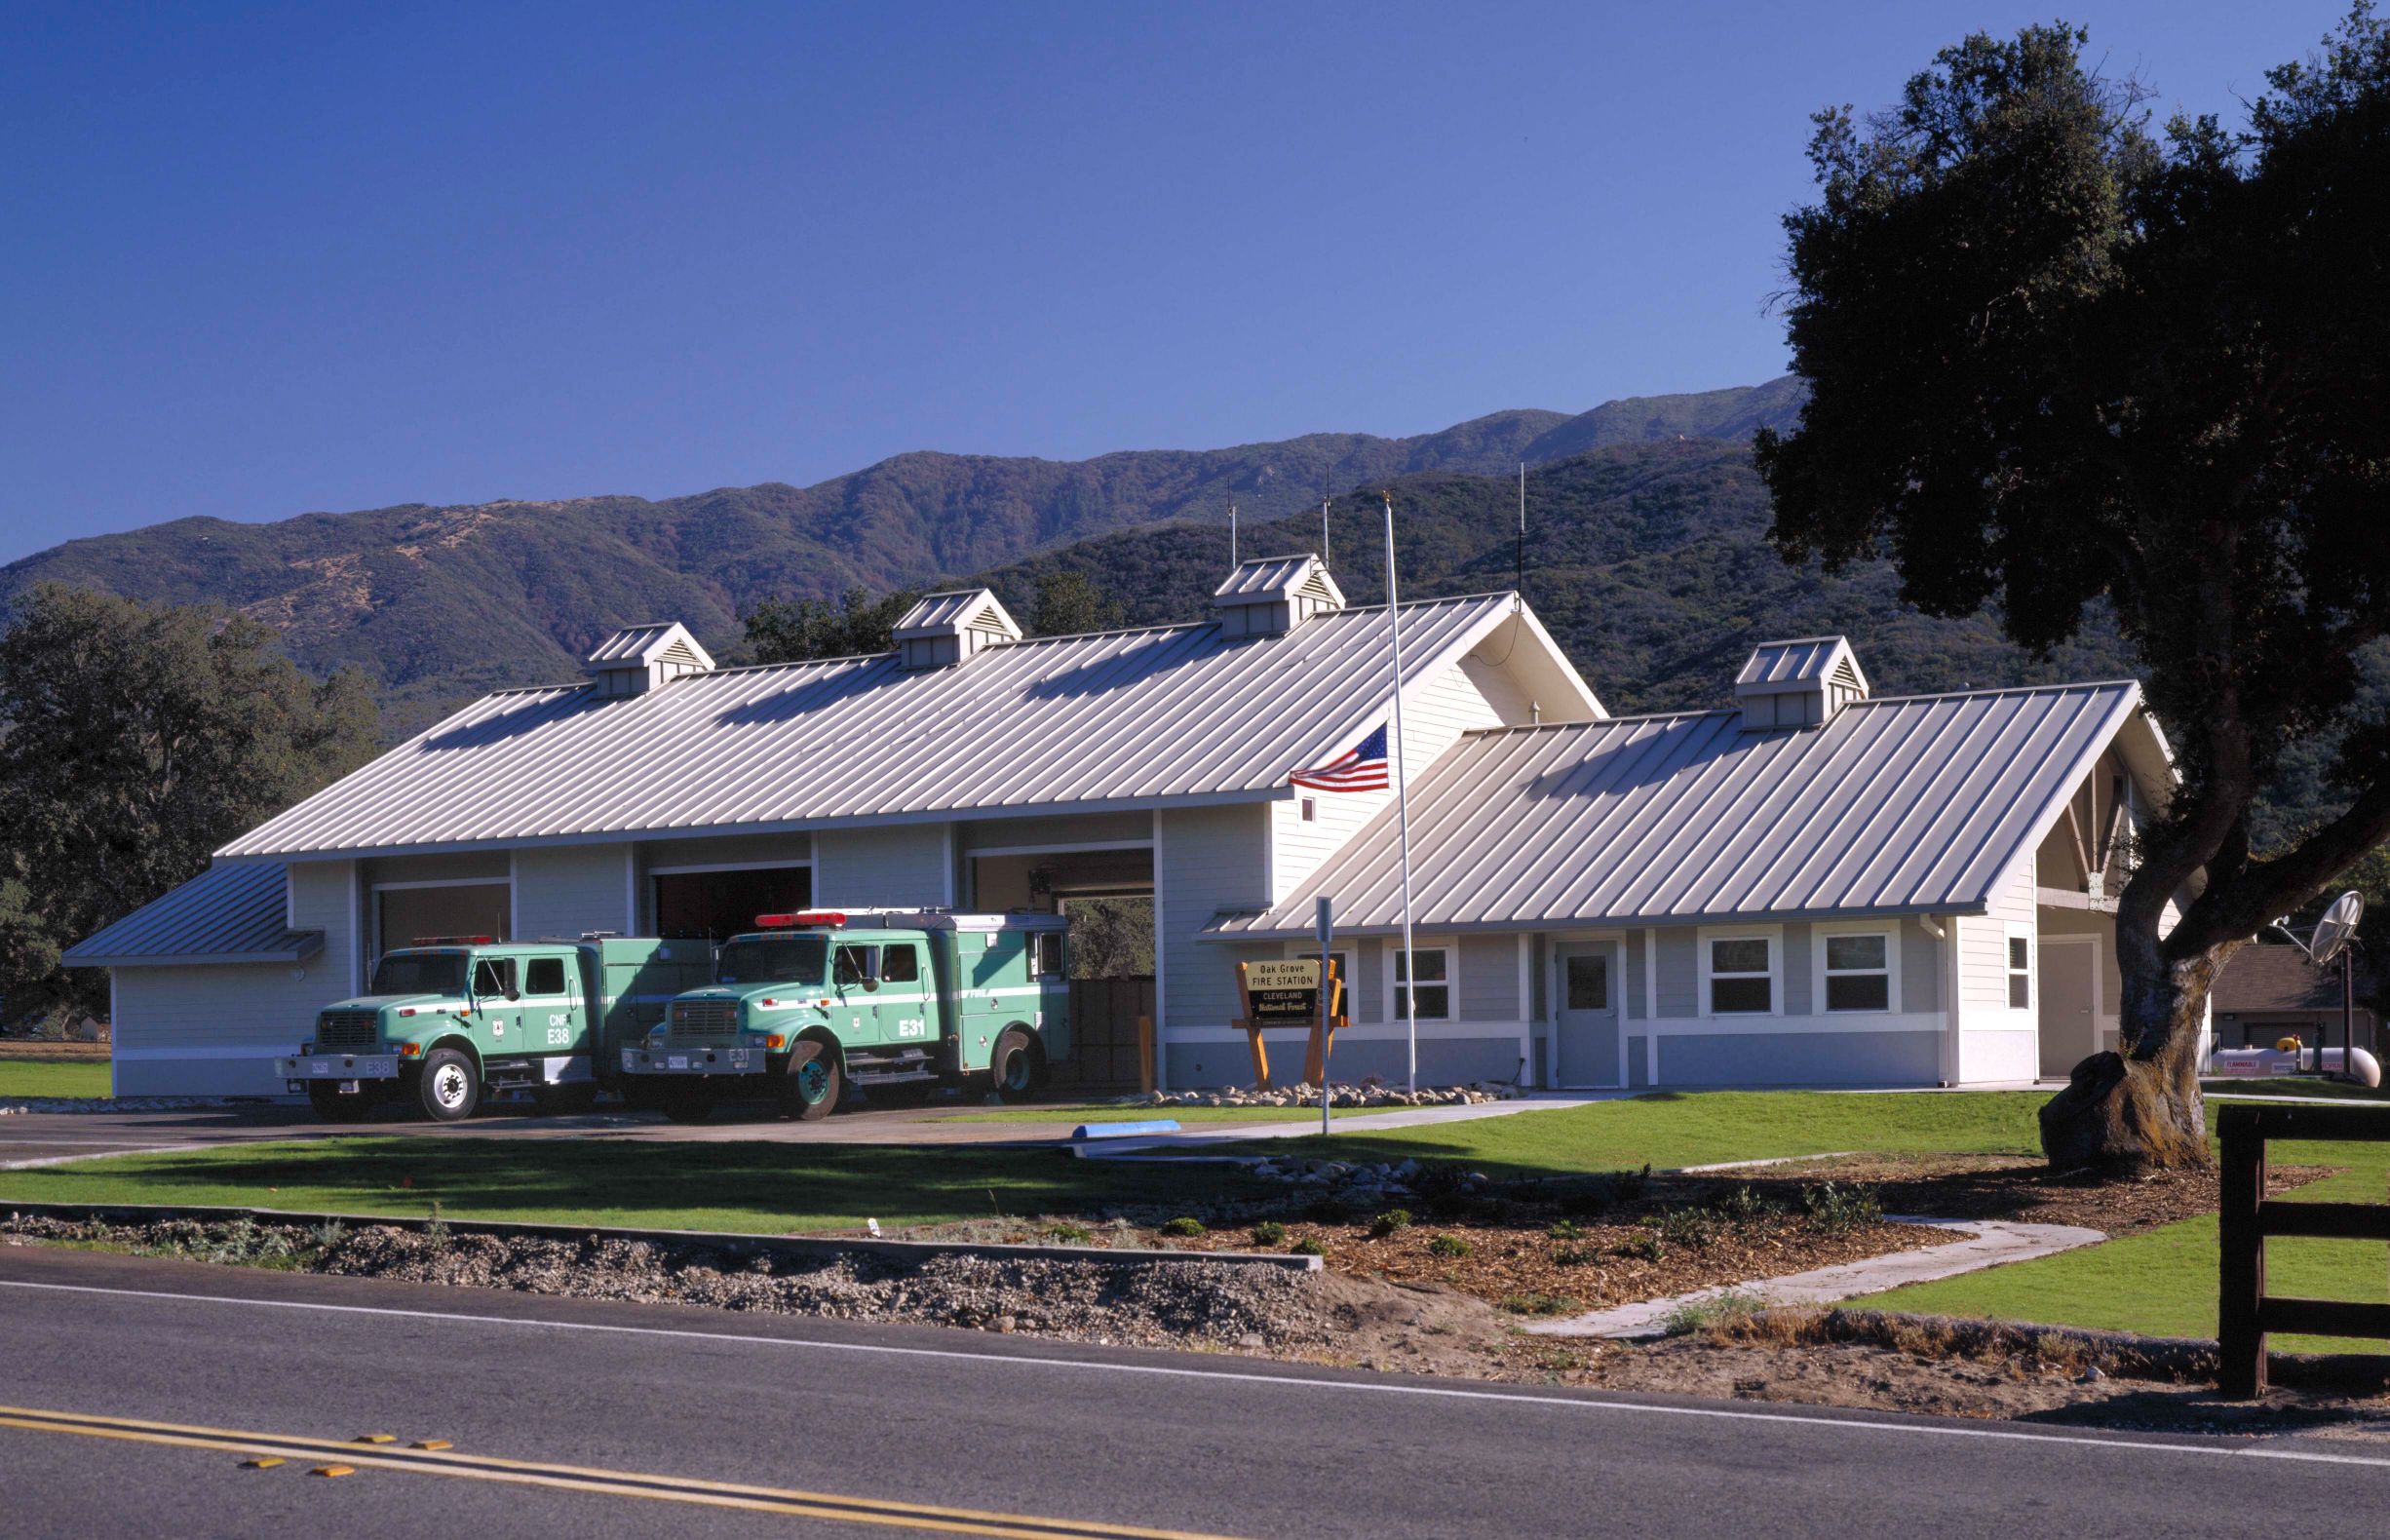 Outside view of fire station and trucks